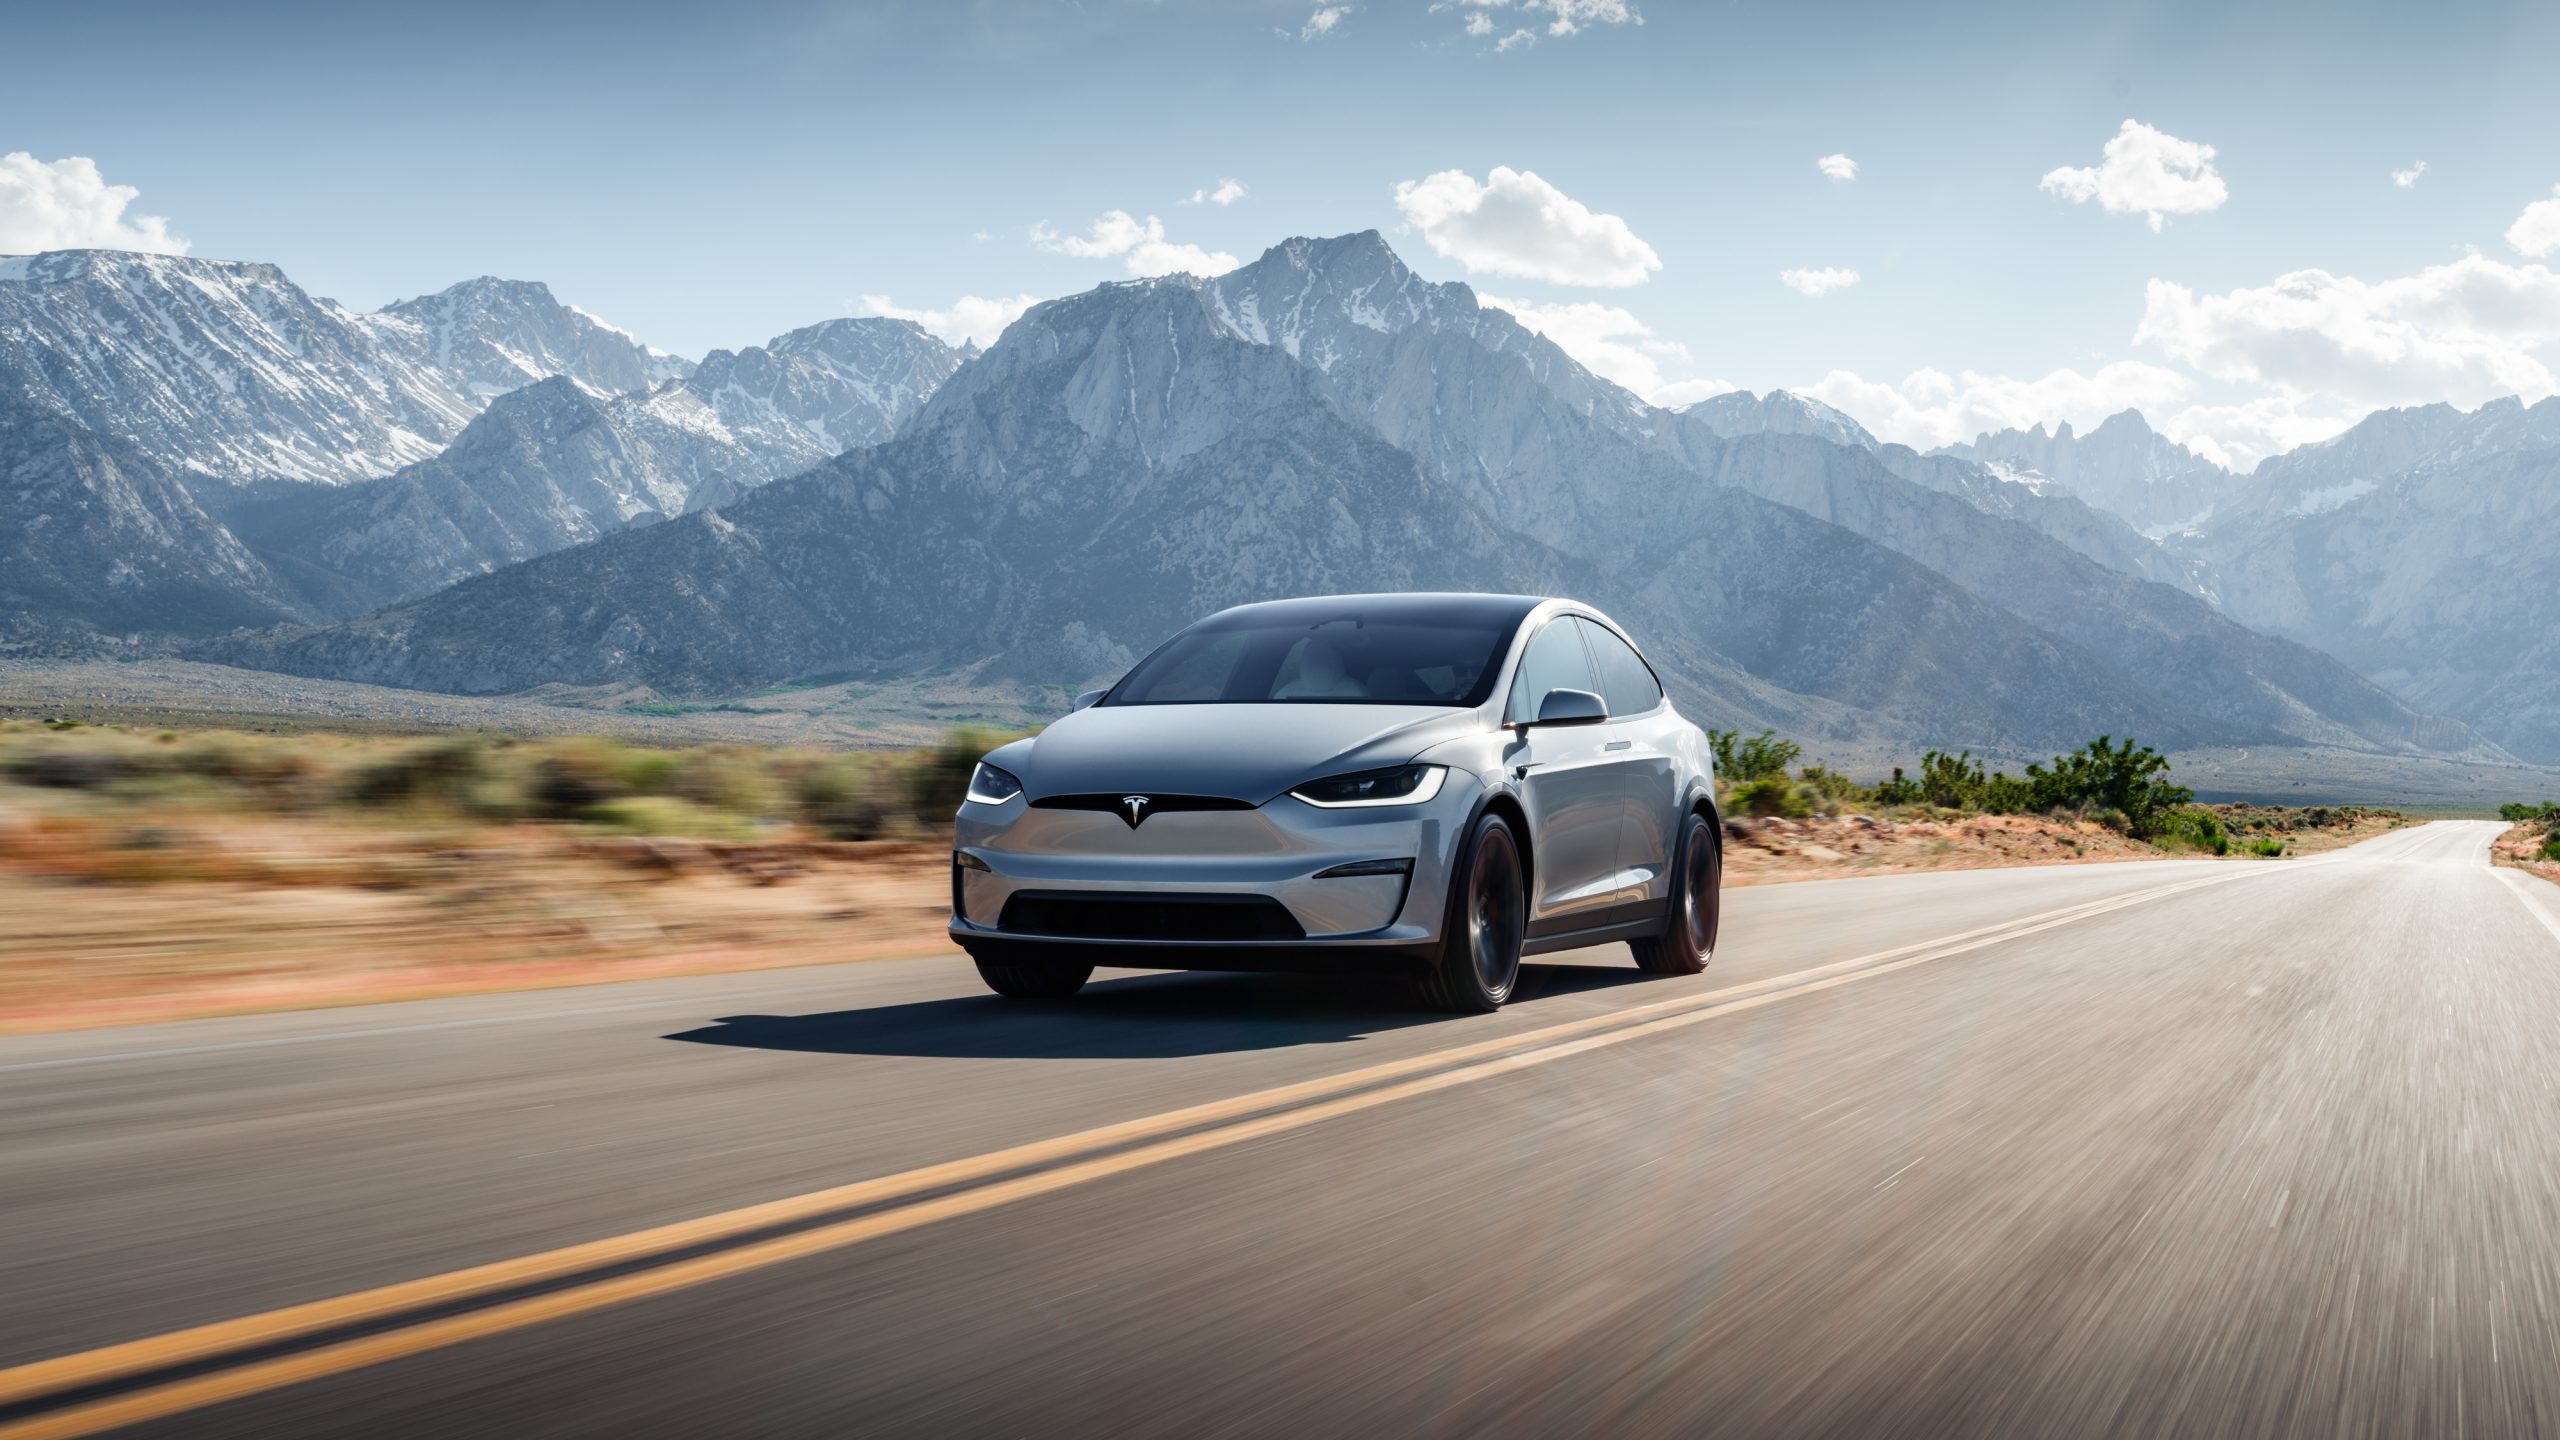 The Model X is Tesla’s flagship SUV, with well-known characteristics like its falcon wing doors. Not only does it have several unique features, but it also boasts an extremely respectable range in comparison to similar electric vehicles (EVs). So, how far can the Tesla Model X go on a single charge? Continue reading for more.